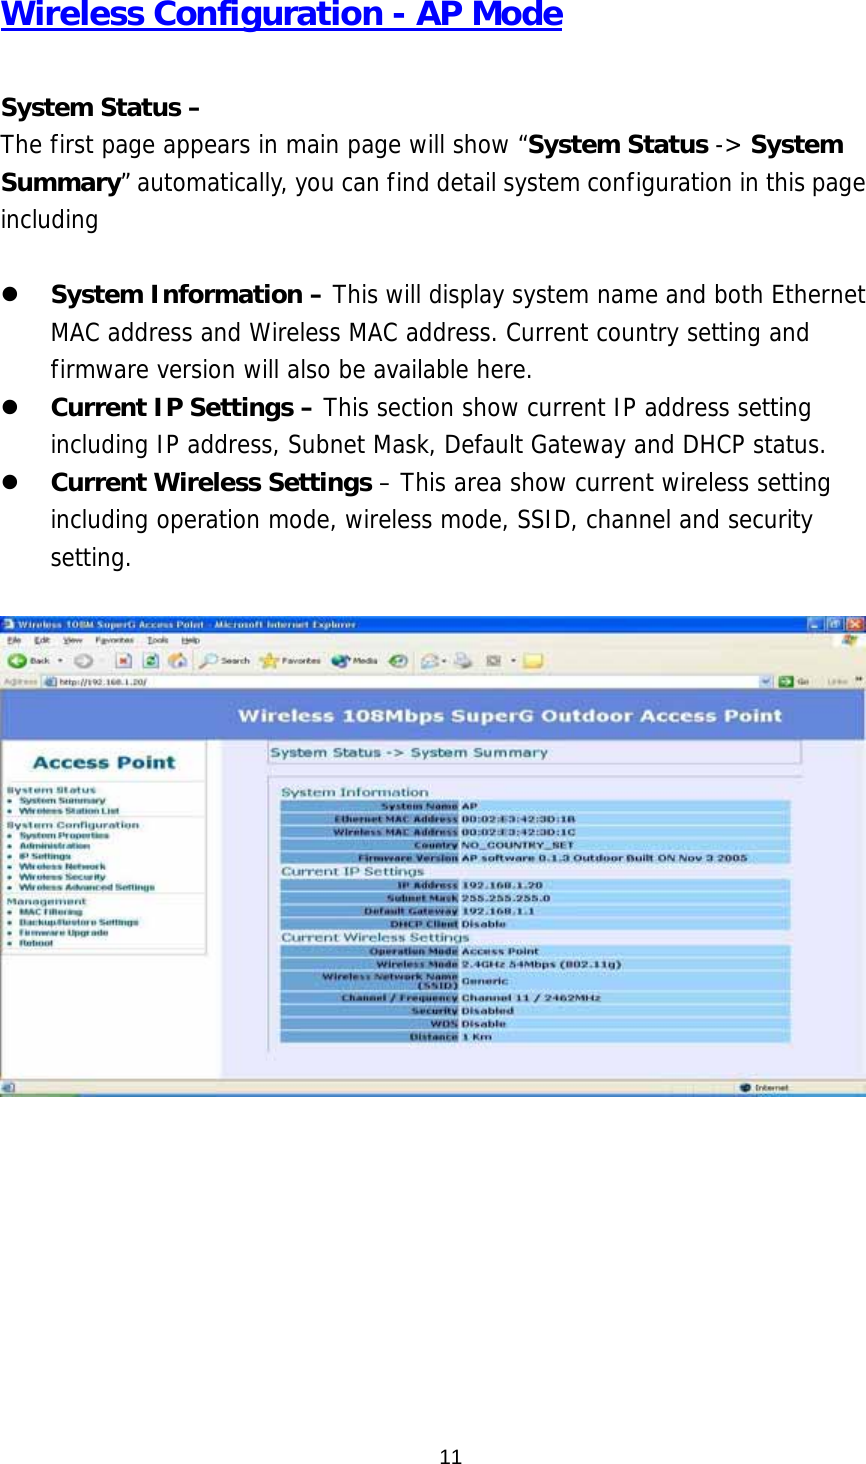  11Wireless Configuration - AP Mode  System Status –   The first page appears in main page will show “System Status -&gt; System Summary” automatically, you can find detail system configuration in this page including     System Information – This will display system name and both Ethernet MAC address and Wireless MAC address. Current country setting and firmware version will also be available here.   Current IP Settings – This section show current IP address setting including IP address, Subnet Mask, Default Gateway and DHCP status.   Current Wireless Settings – This area show current wireless setting including operation mode, wireless mode, SSID, channel and security setting.    